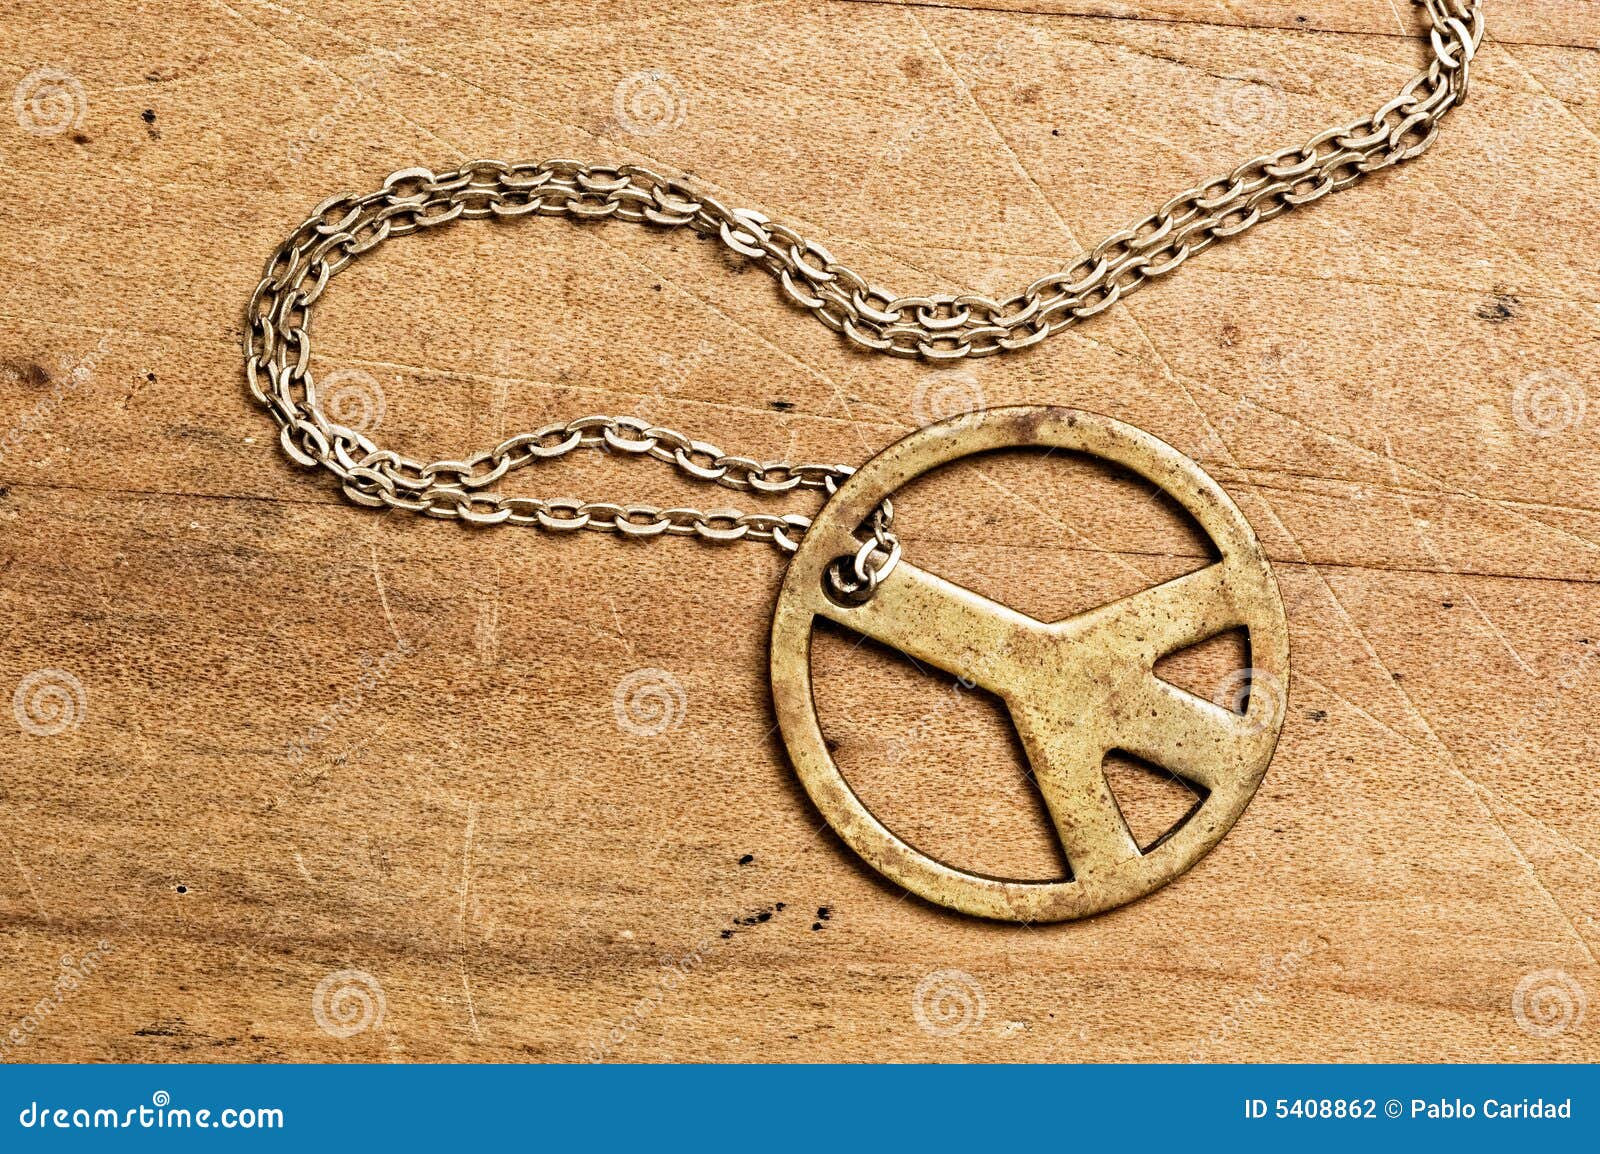 Peace sign necklace -